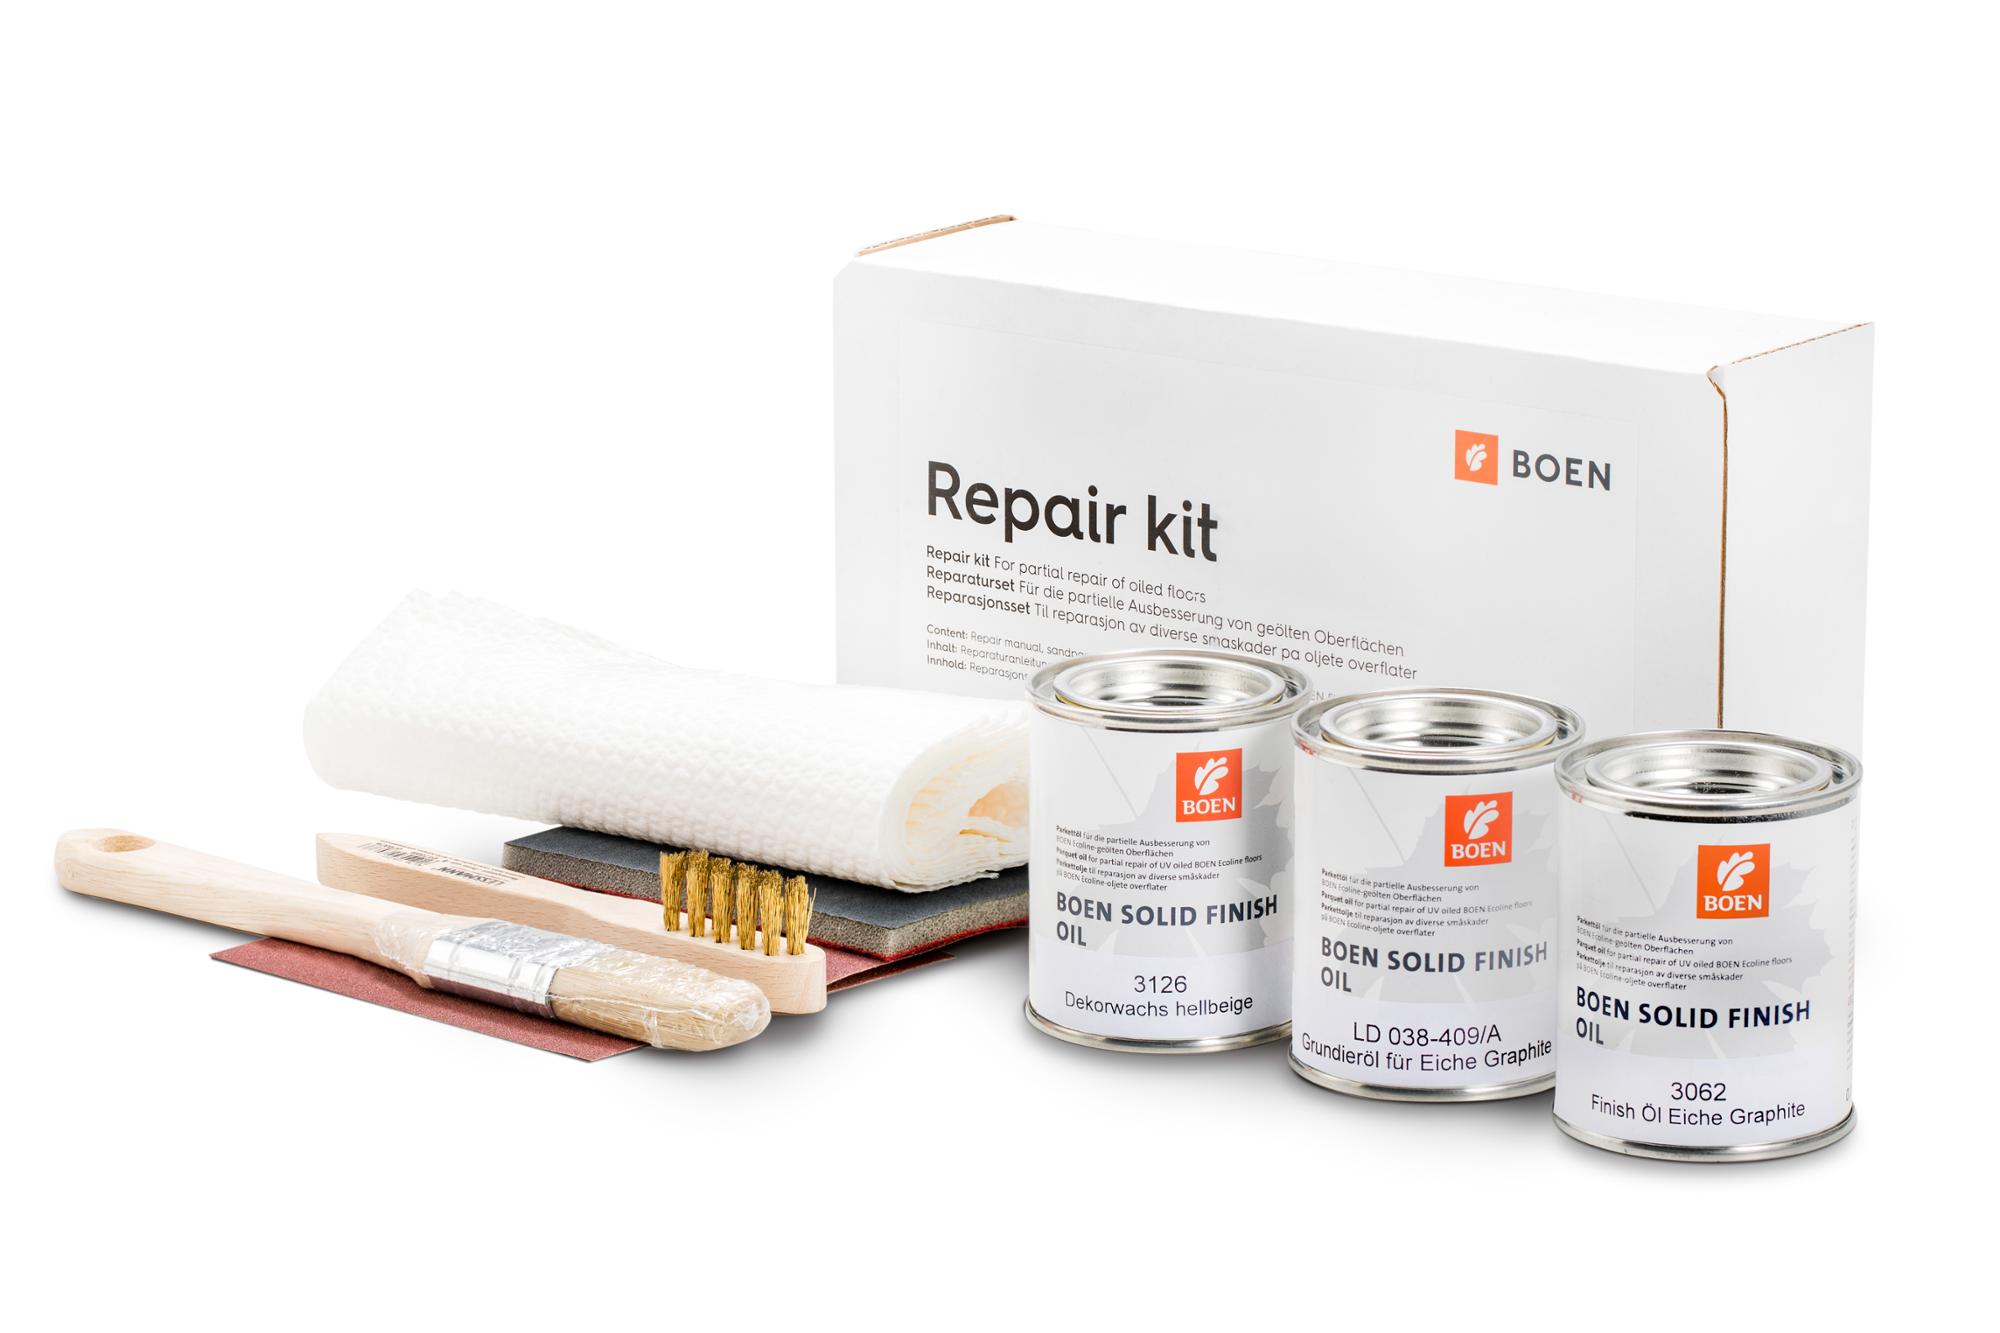 BOEN kit riparazione per Rovere Sand

For the partial repair of natural oiled surfaces.
Content: Repair instruction, abrasive paper P 150,
abrasive web P 360, 0,125 l BOEN Live Natural Oil,
paint brush, cleaning cloths.